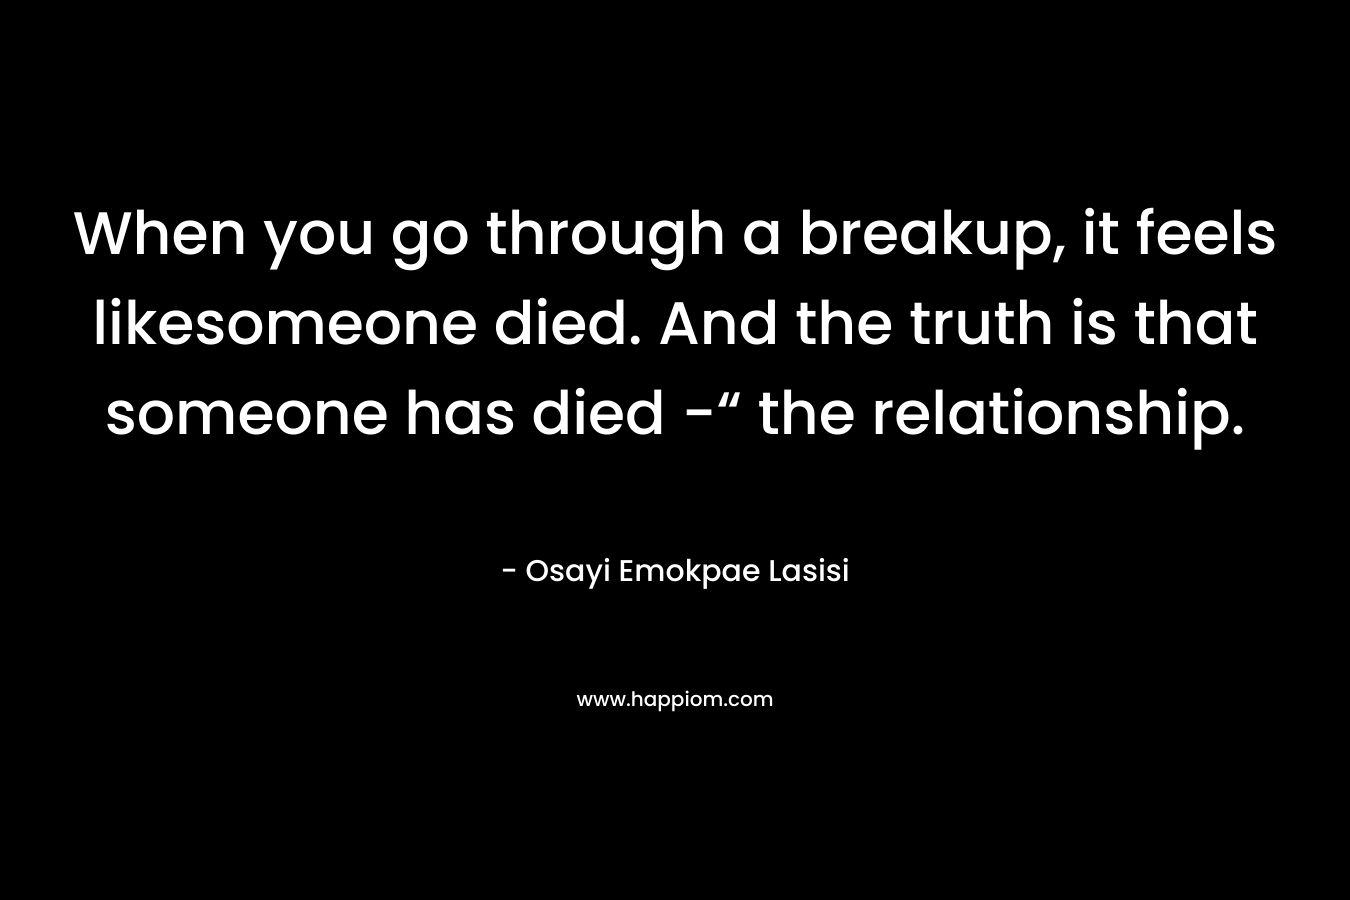 When you go through a breakup, it feels likesomeone died. And the truth is that someone has died -“ the relationship. – Osayi Emokpae Lasisi